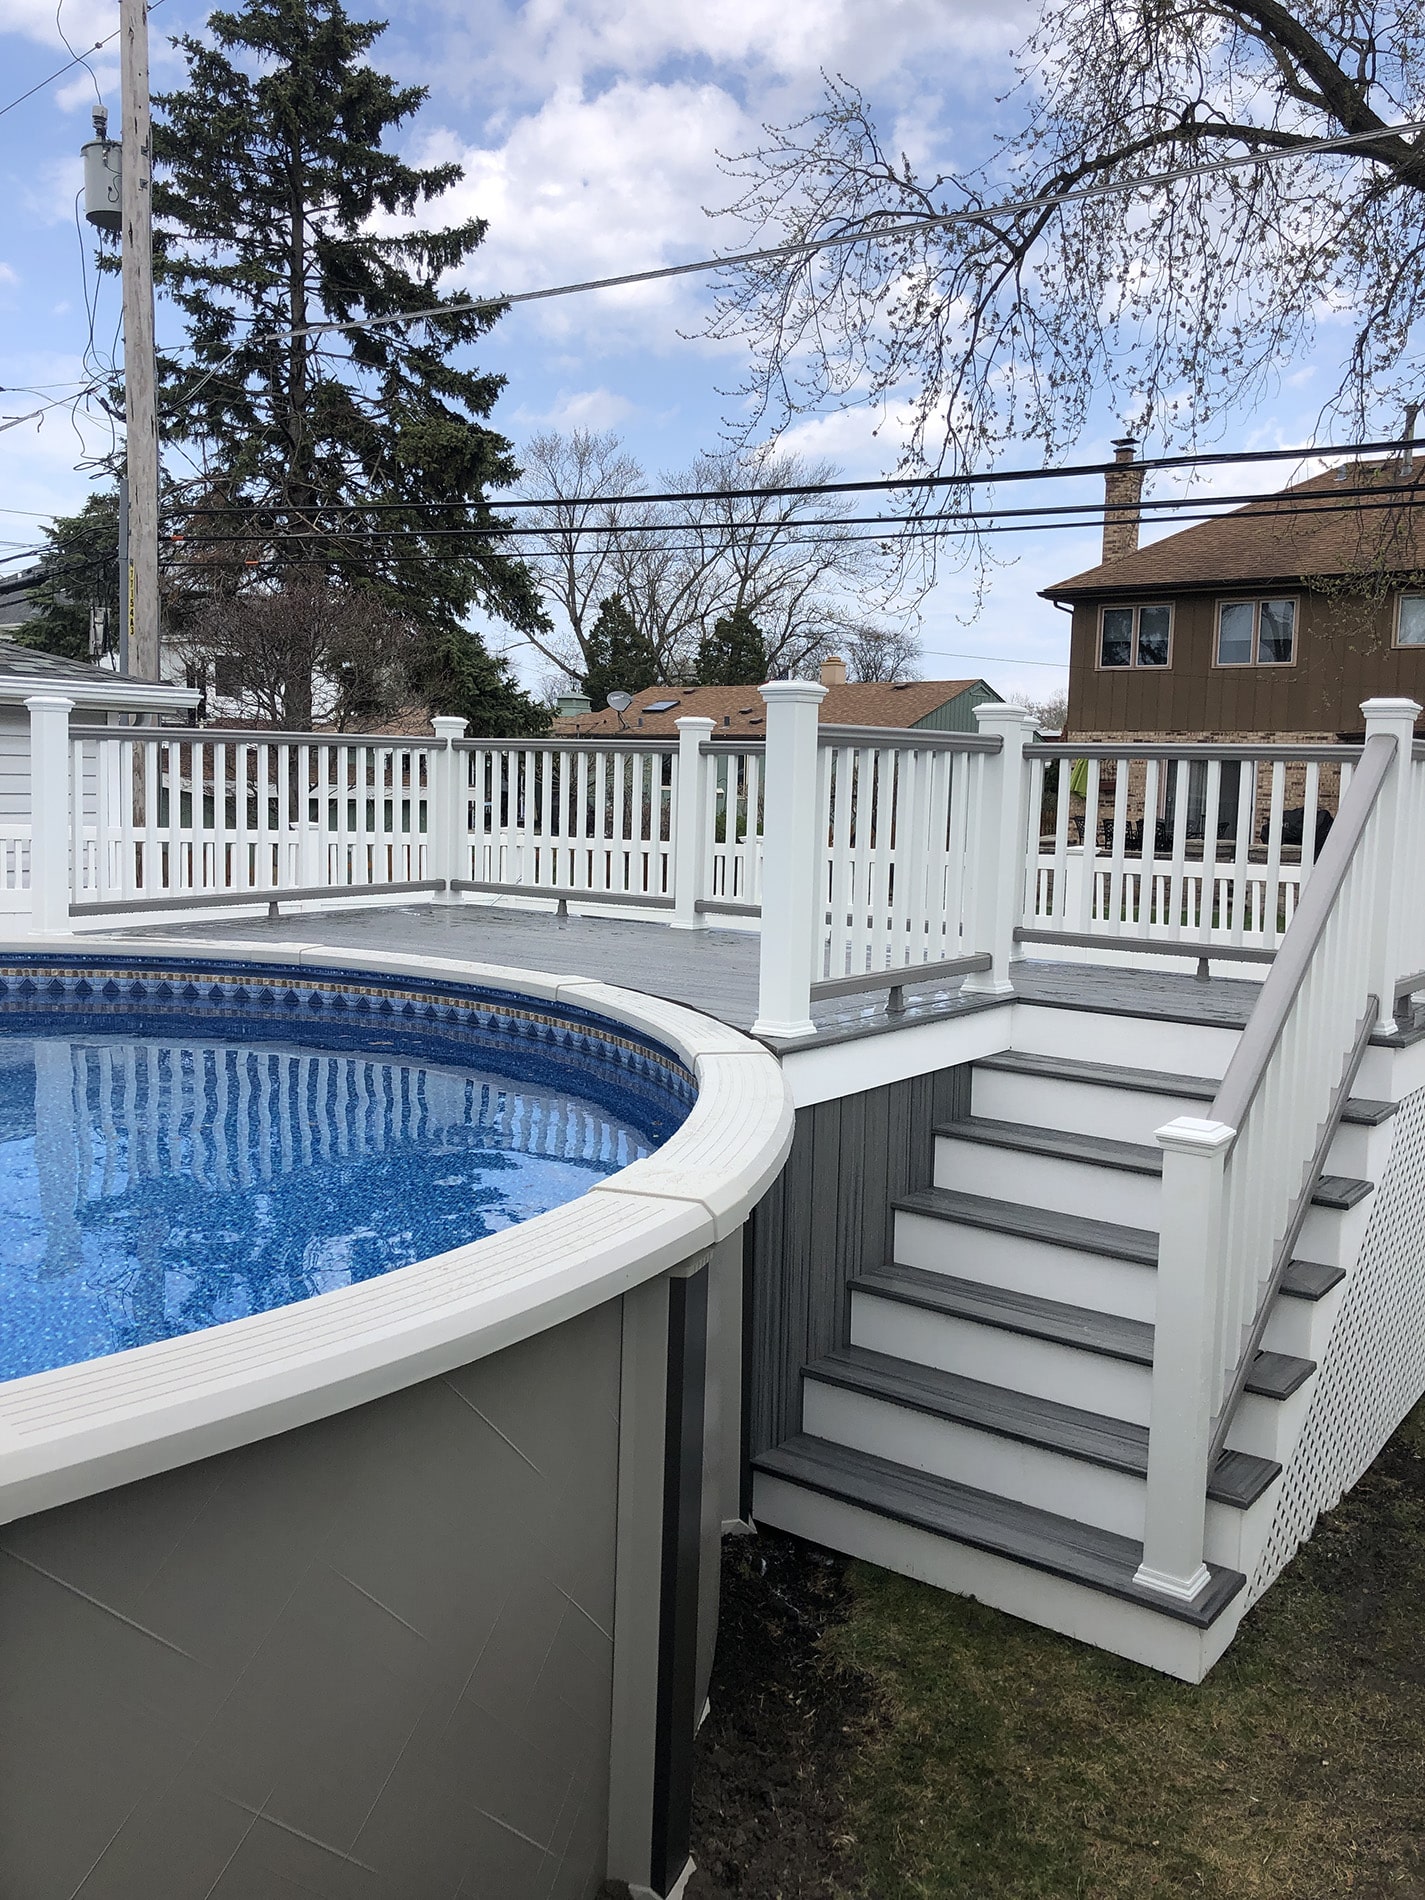 composite deck photo gallery img 0354